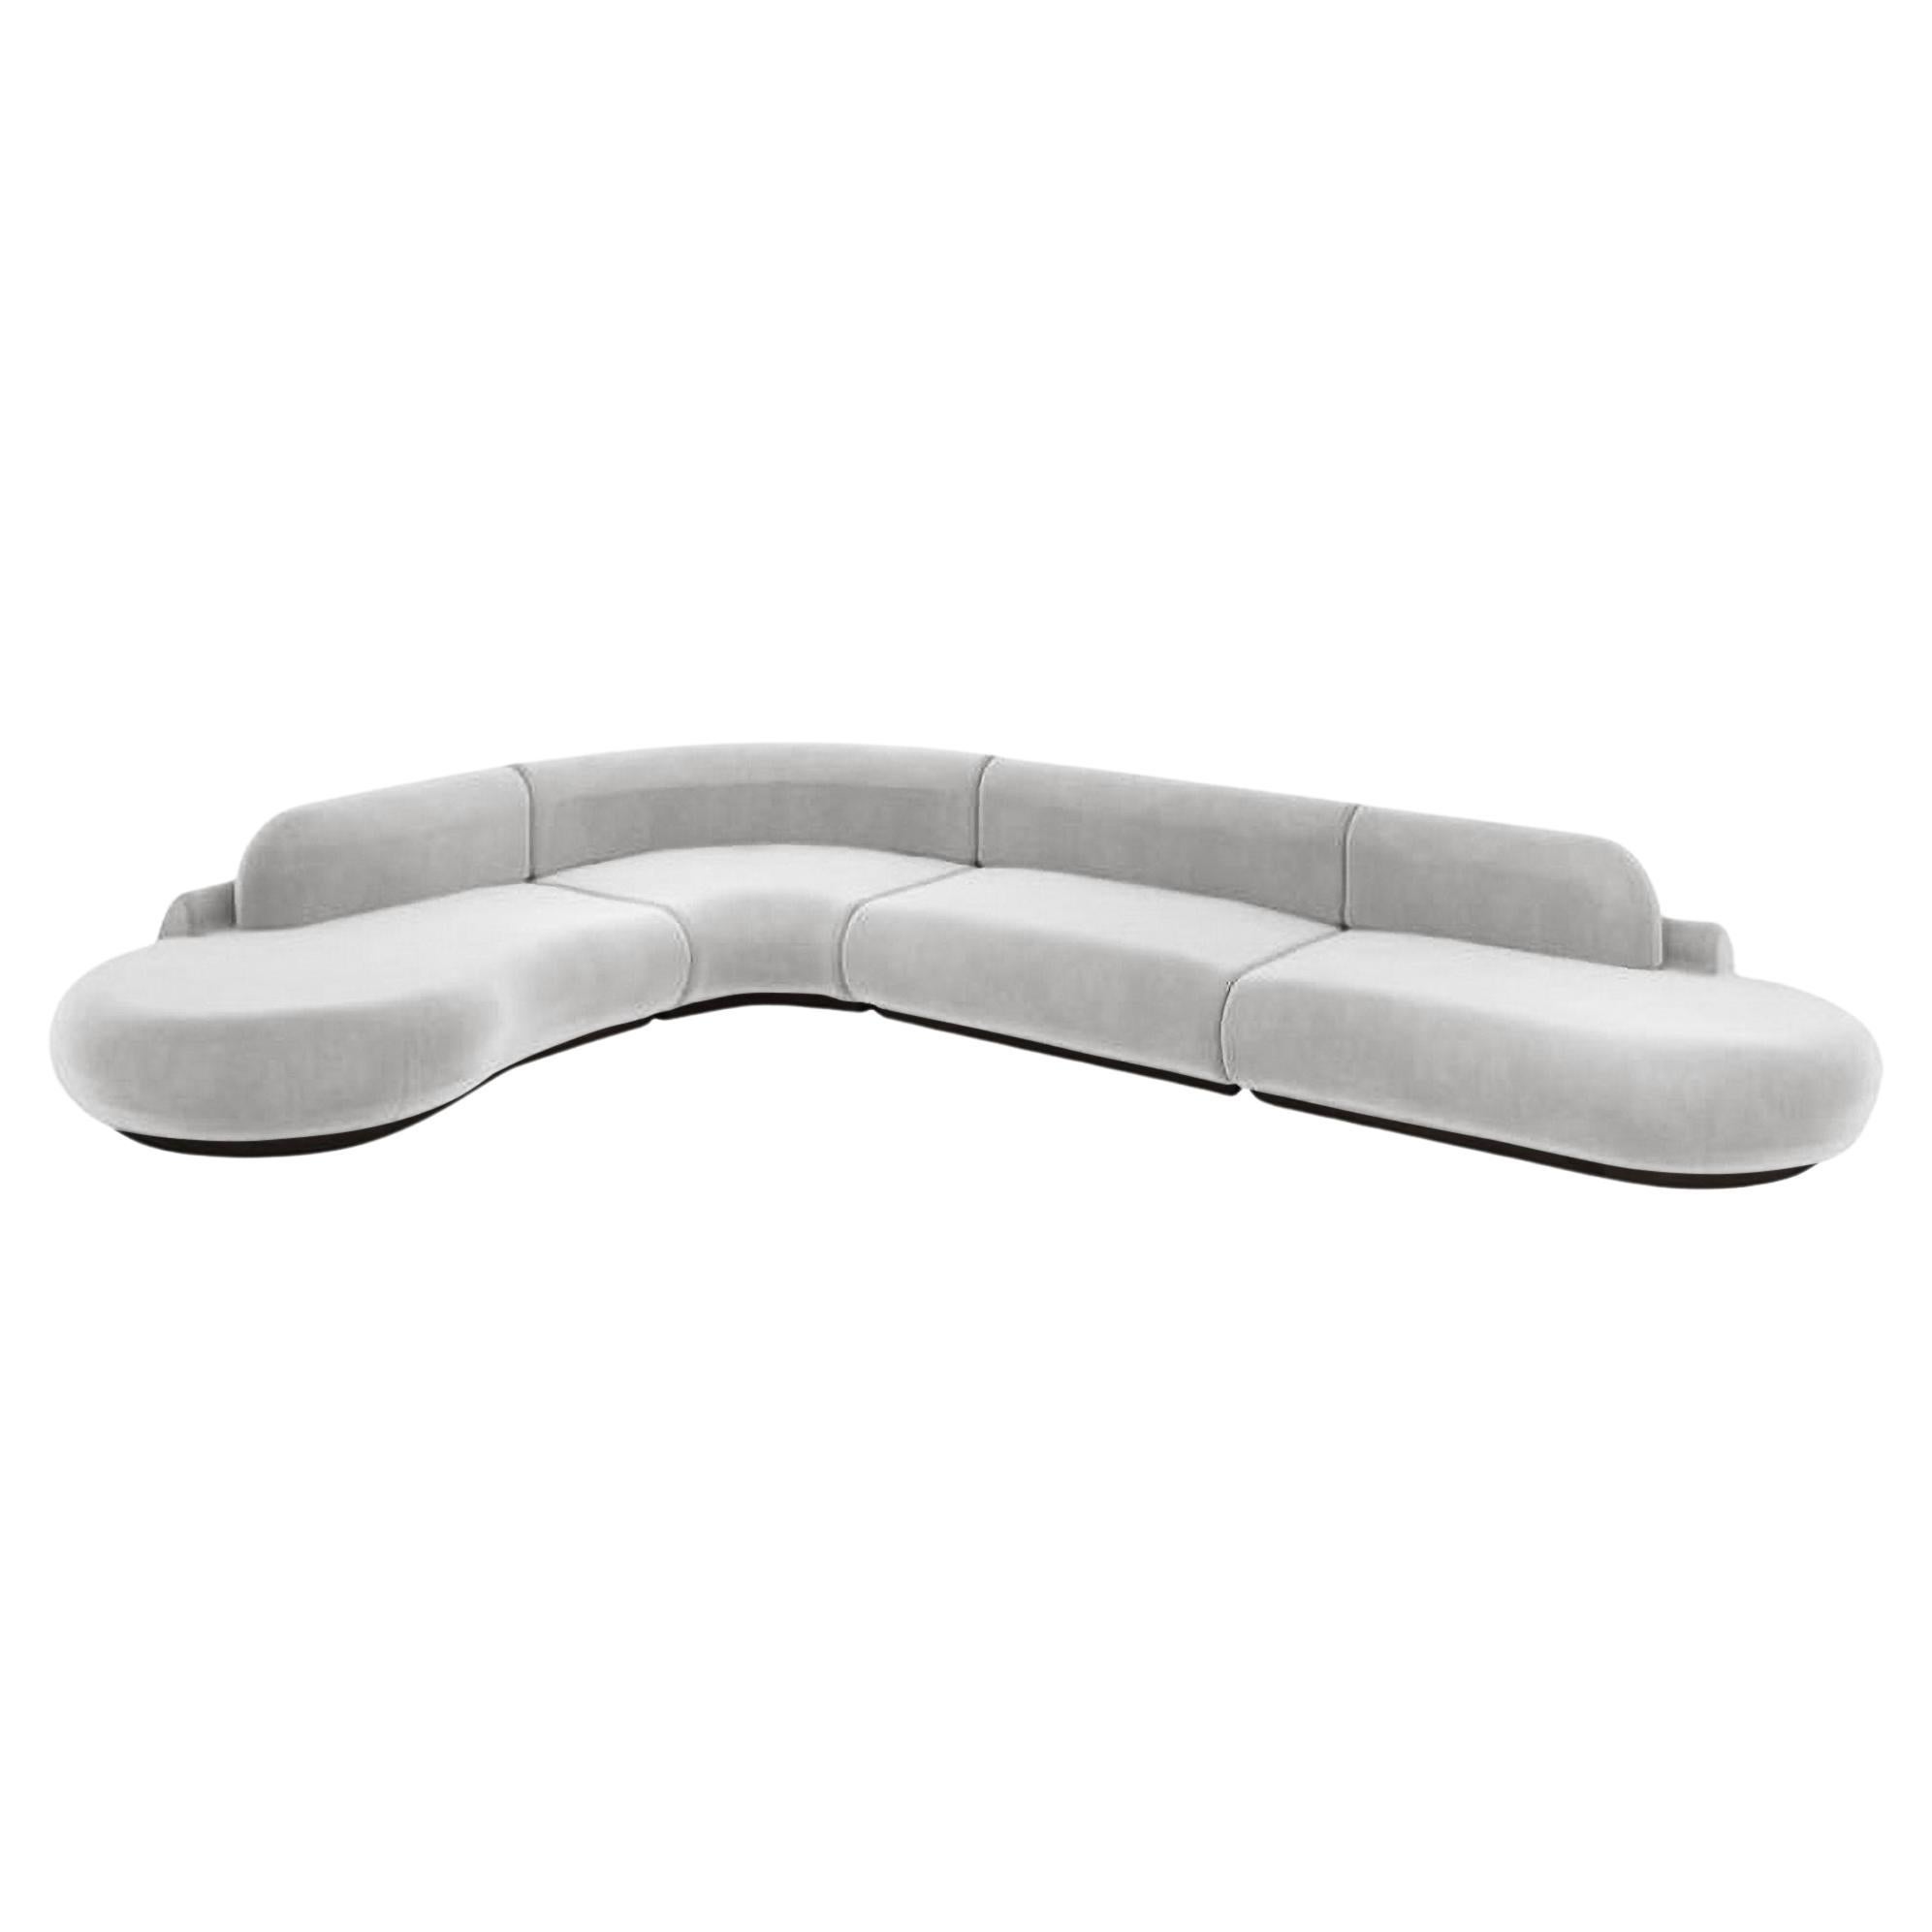 Naked Sectional Sofa, 4 Piece with Beech Ash-056-5 and Aluminium